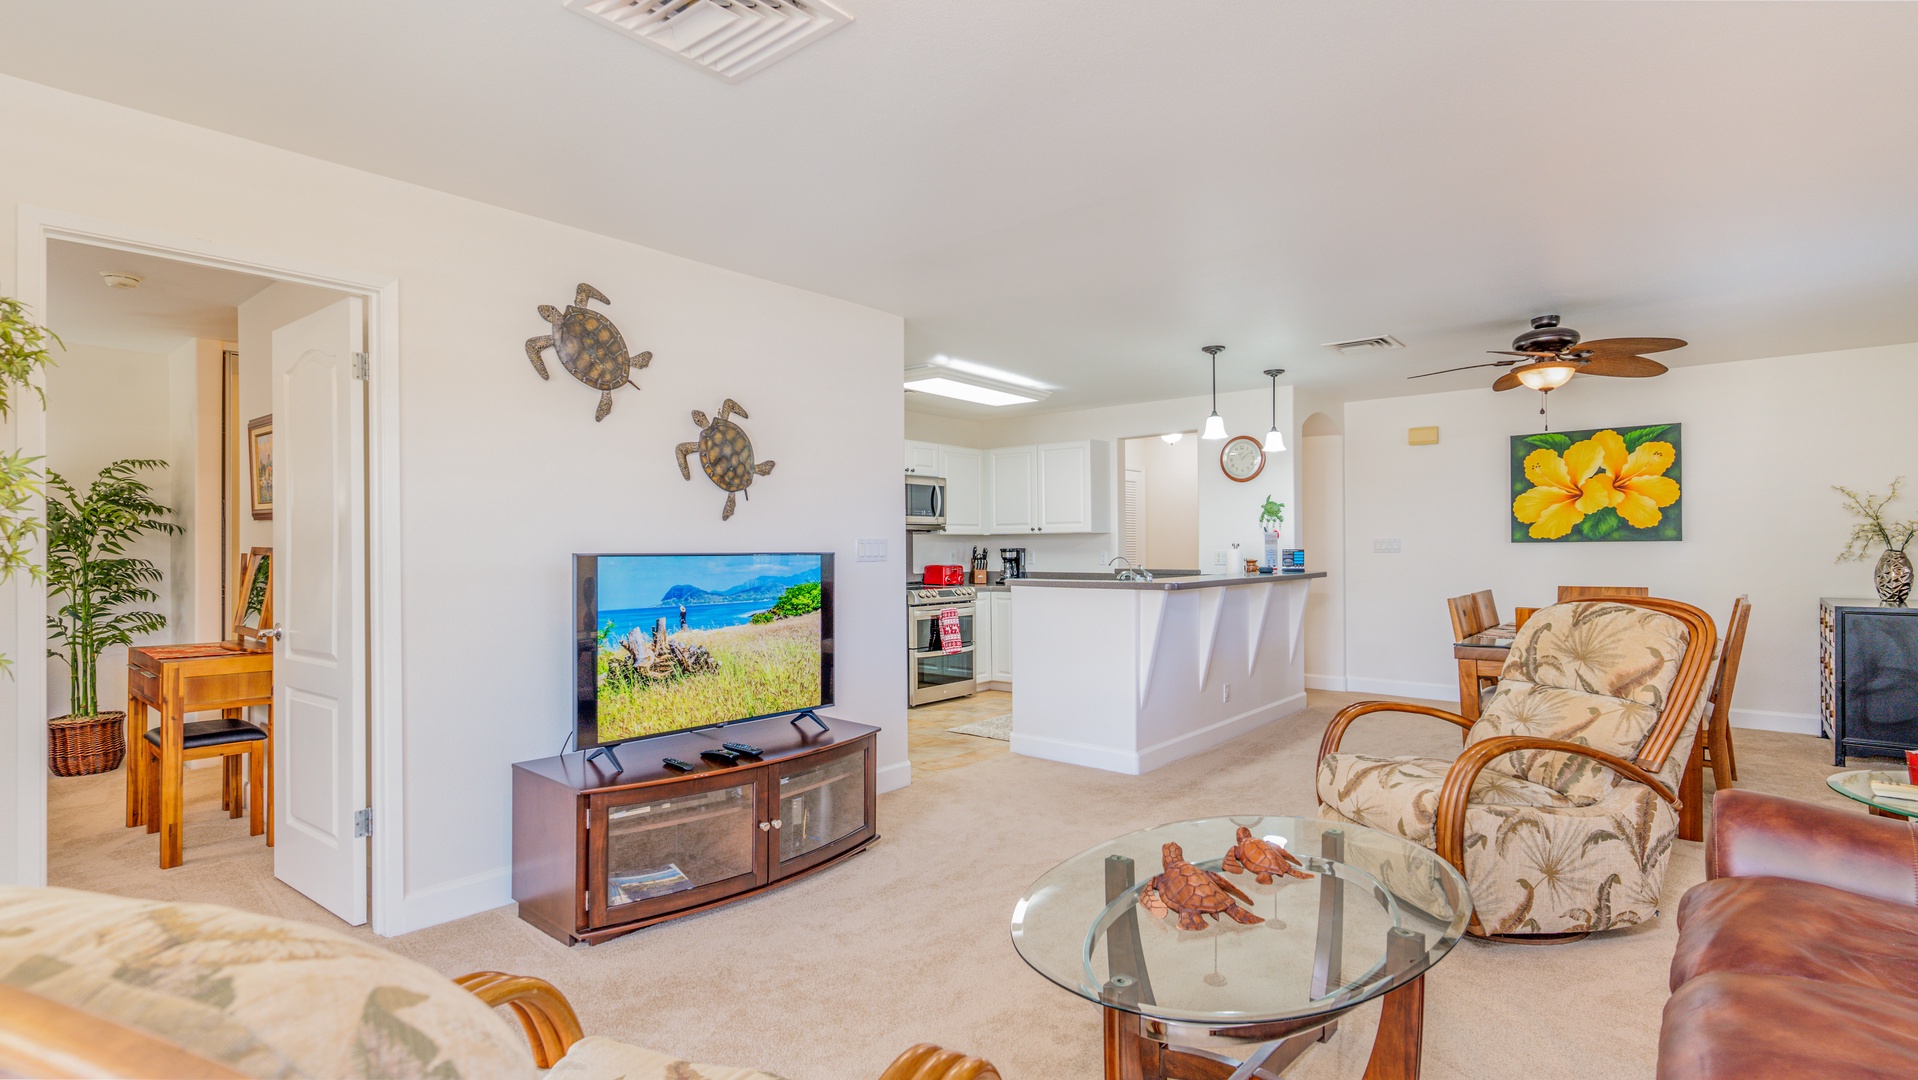 Kapolei Vacation Rentals, Ko Olina Kai 1057B - Seamless living with the kitchen, living and dining areas for easy conversation.